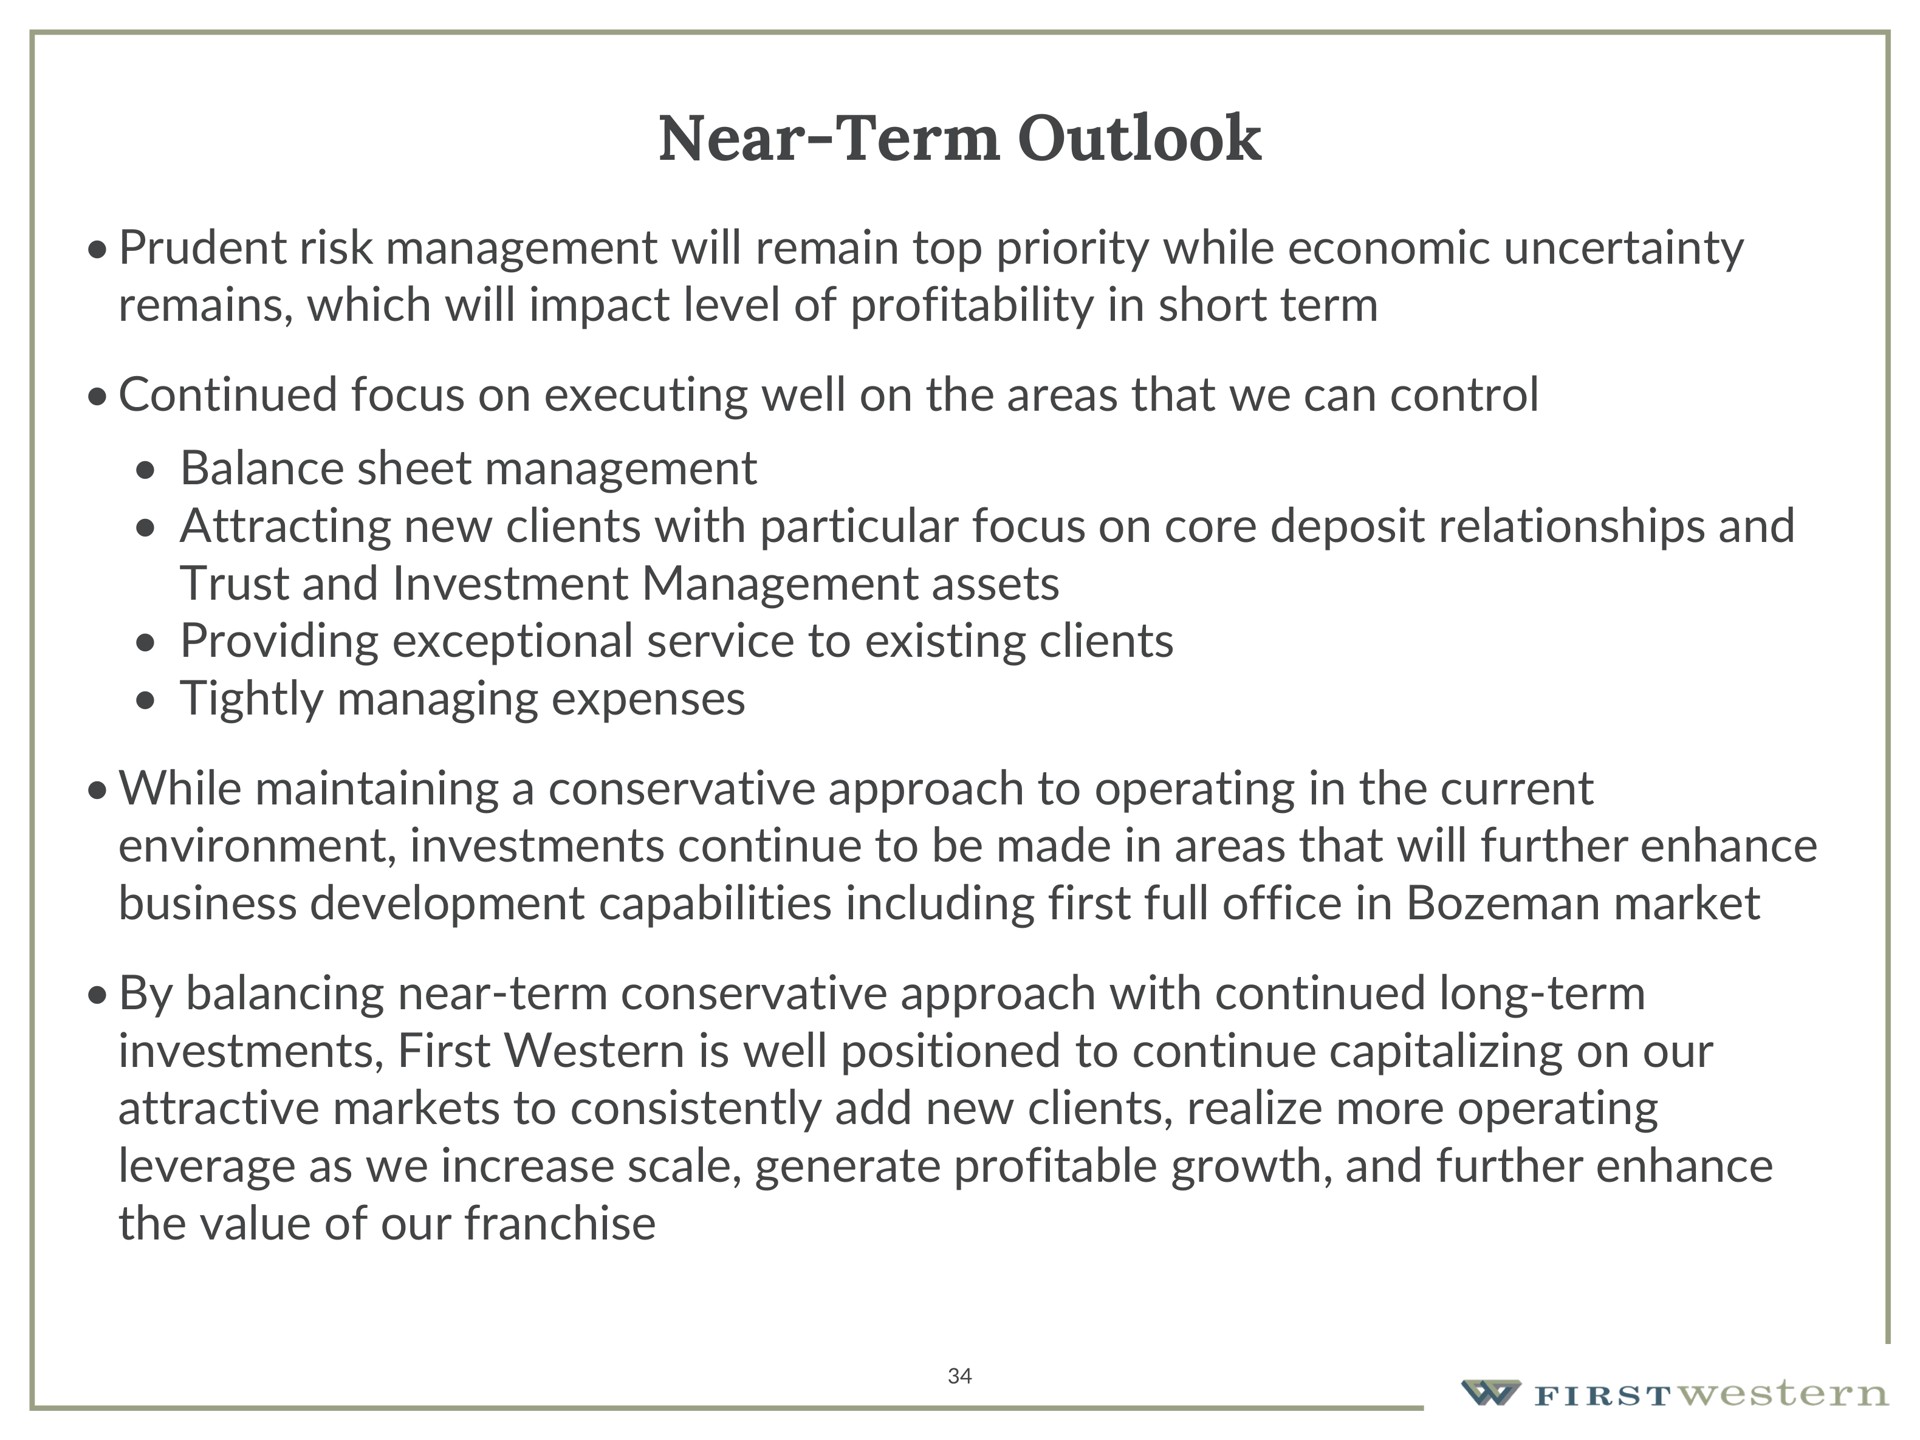 near term outlook prudent risk management will remain top priority while economic uncertainty remains which will impact level of profitability in short term continued focus on executing well on the areas that we can control balance sheet management attracting new clients with particular focus on core deposit relationships and trust and investment management assets providing exceptional service to existing clients tightly managing expenses while maintaining a conservative approach to operating in the current environment investments continue to be made in areas that will further enhance business development capabilities including first full office in market by balancing near term conservative approach with continued long term investments first western is well positioned to continue capitalizing on our attractive markets to consistently add new clients realize more operating leverage as we increase scale generate profitable growth and further enhance the value of our franchise | First Western Financial